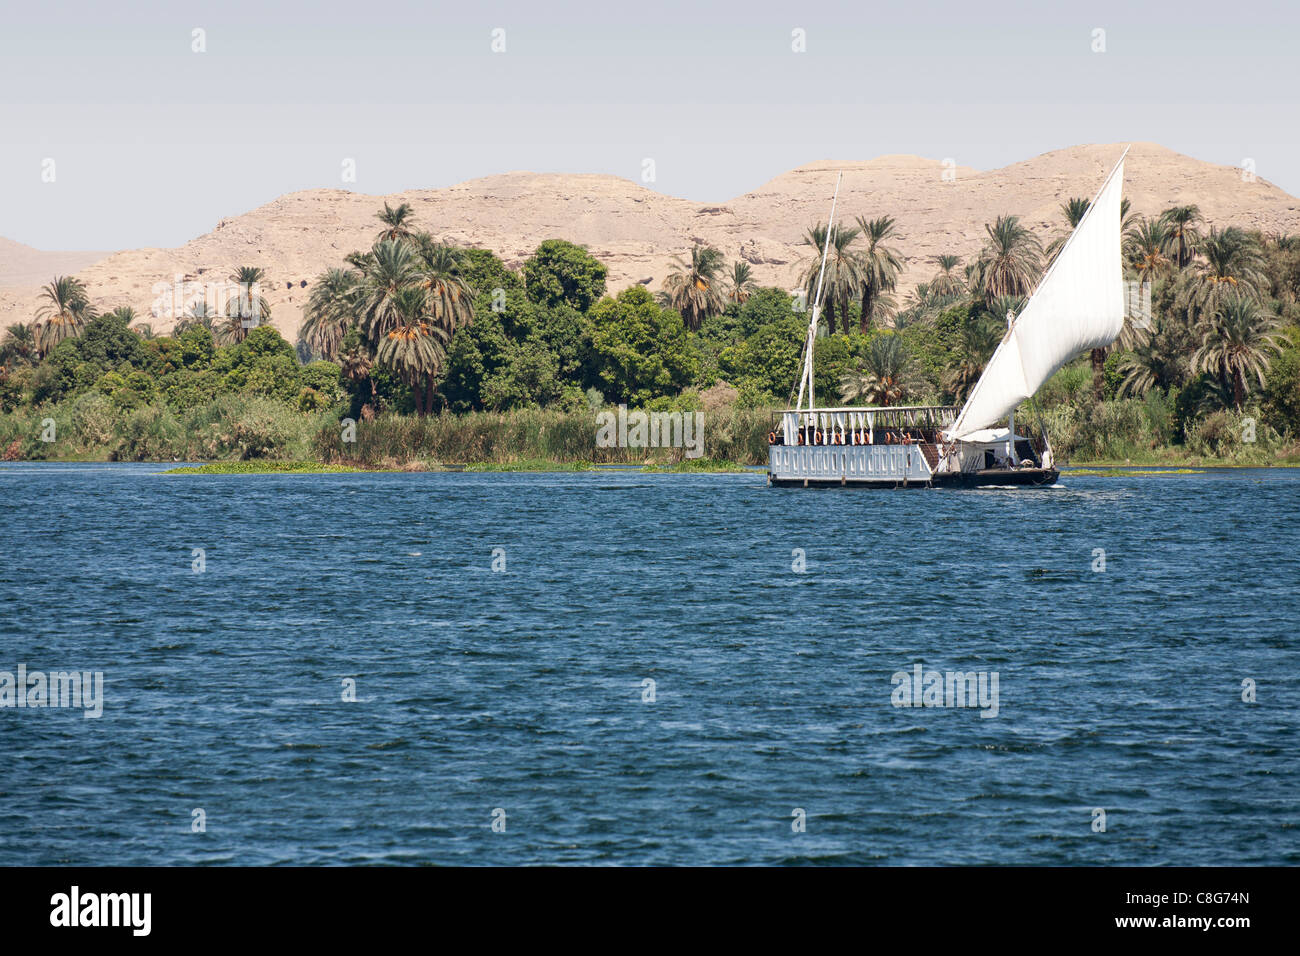 A dahabiya sailing on the river Nile Egypt, near the bank with palms and desert mountains in the background Stock Photo